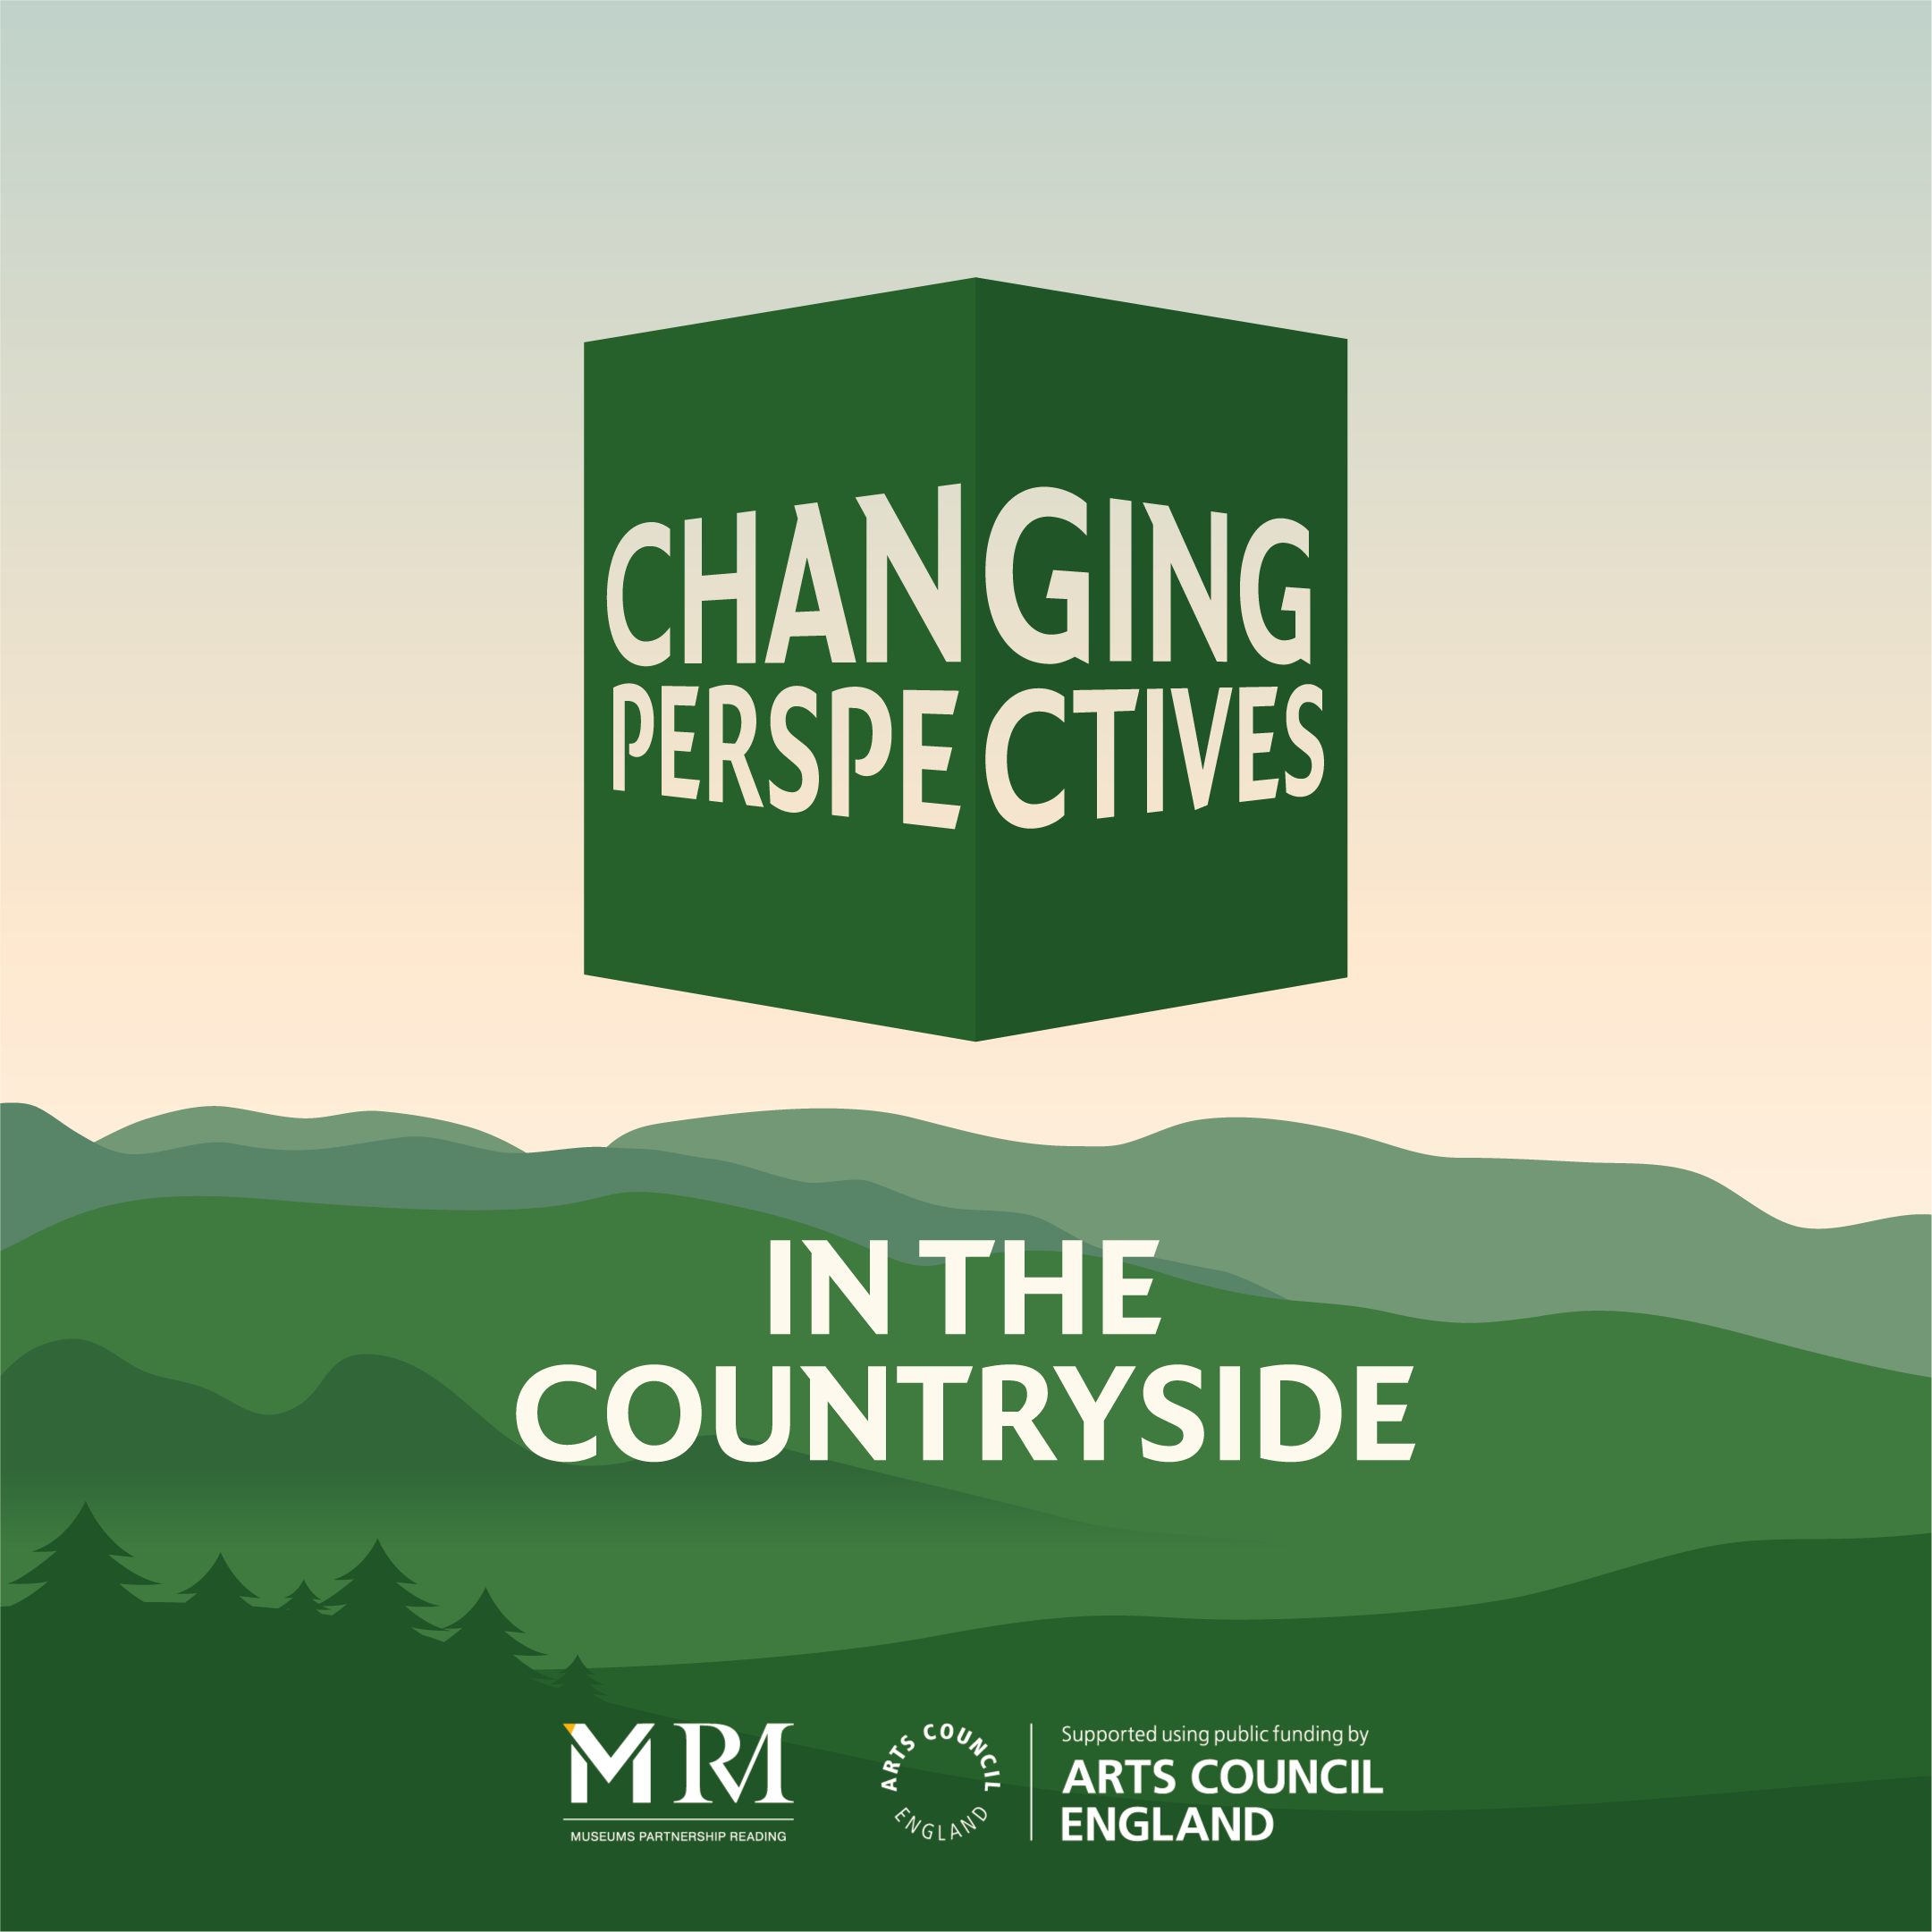 The logo for Changing Perspectives in the Countryside.